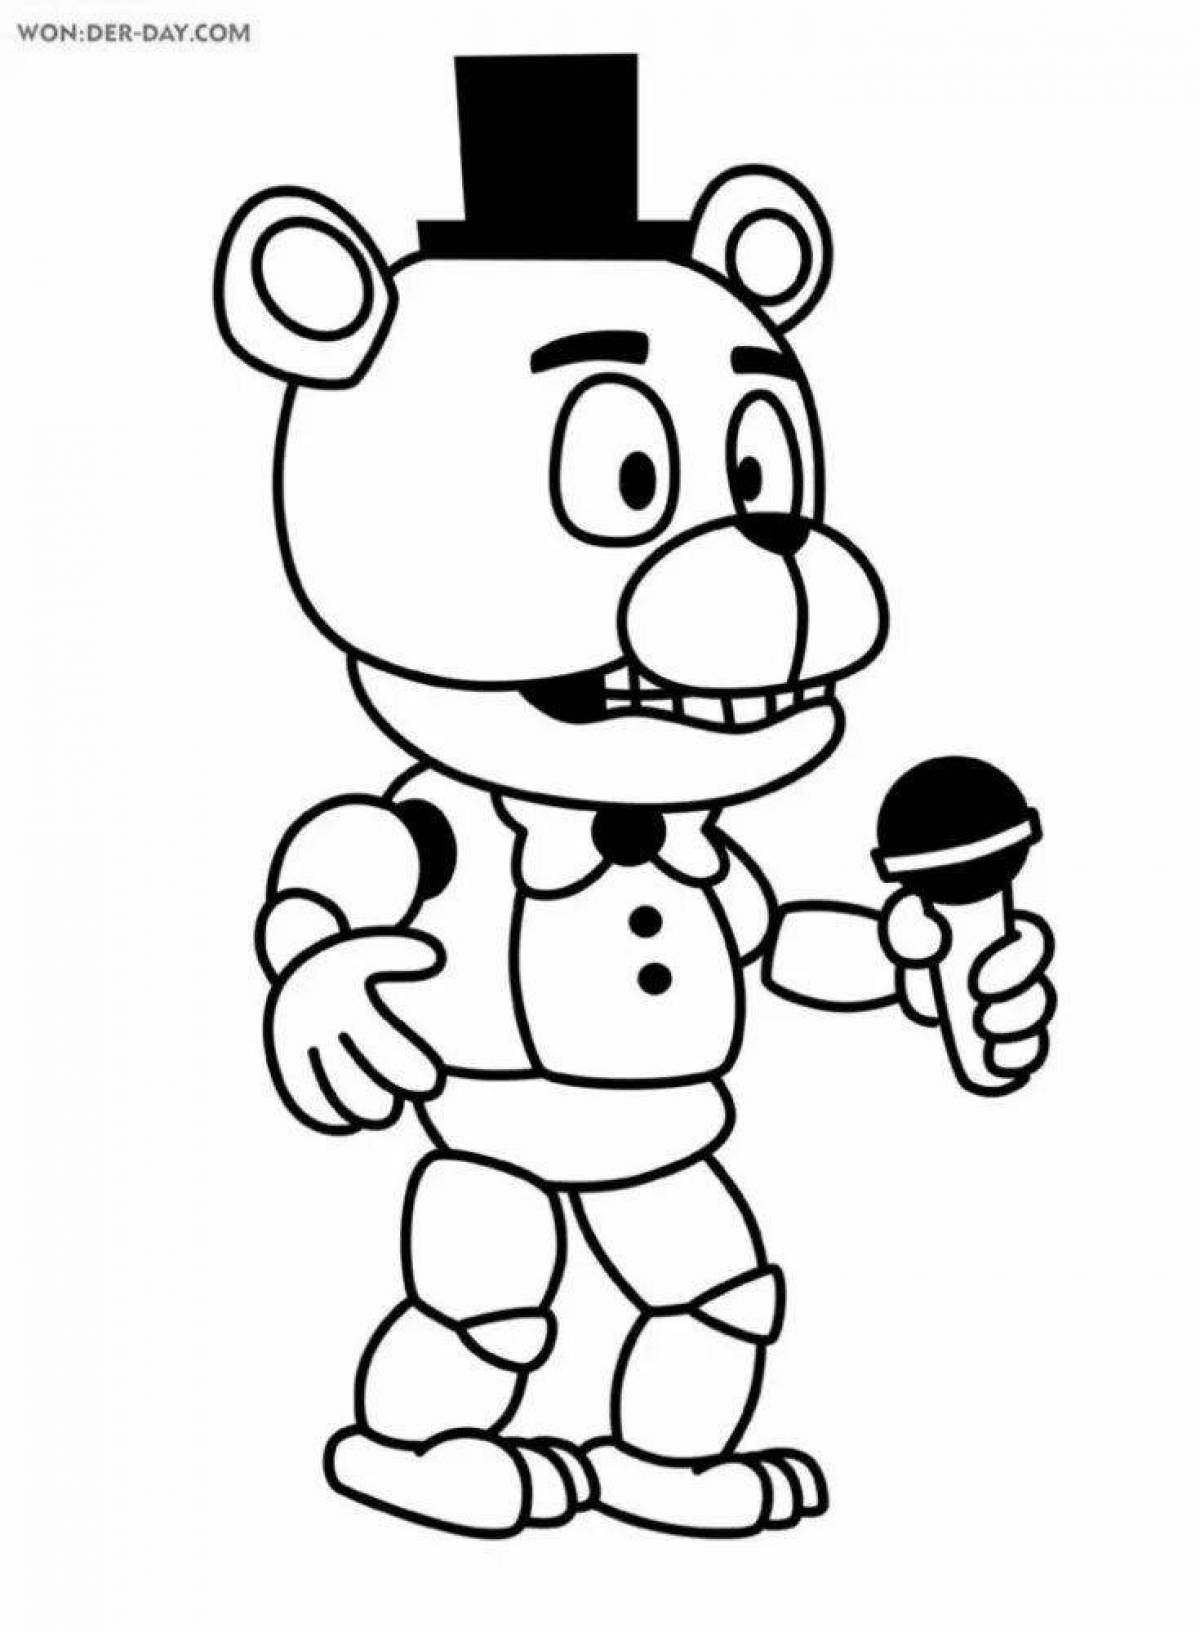 Coloring freddy the amazing bear